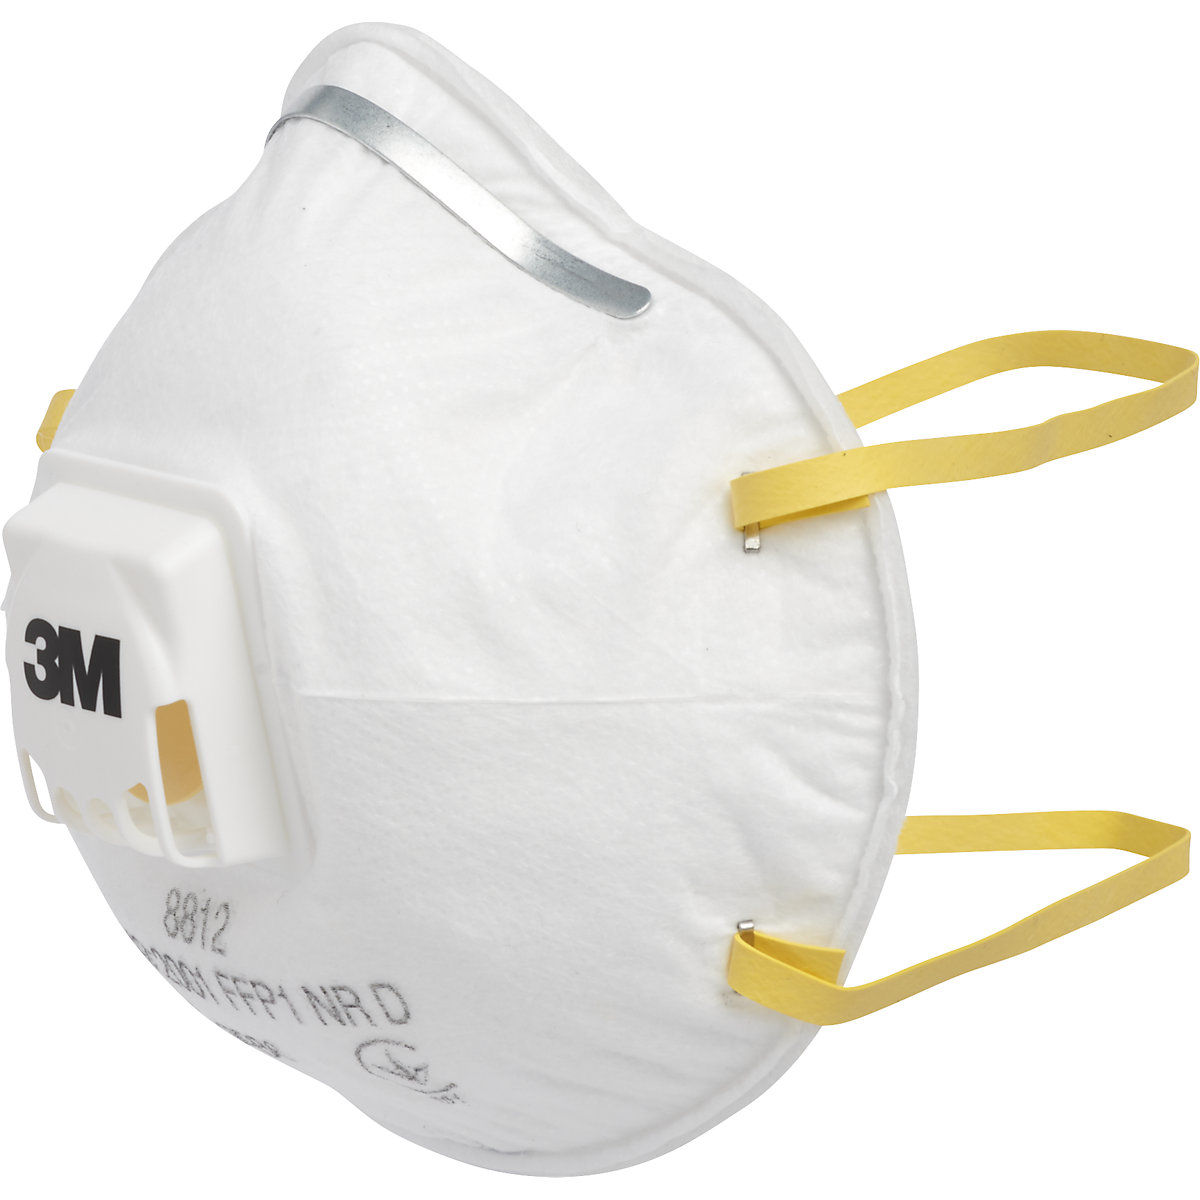 Respiratory protection mask 8812 FFP1 NR D with exhalation valve – 3M